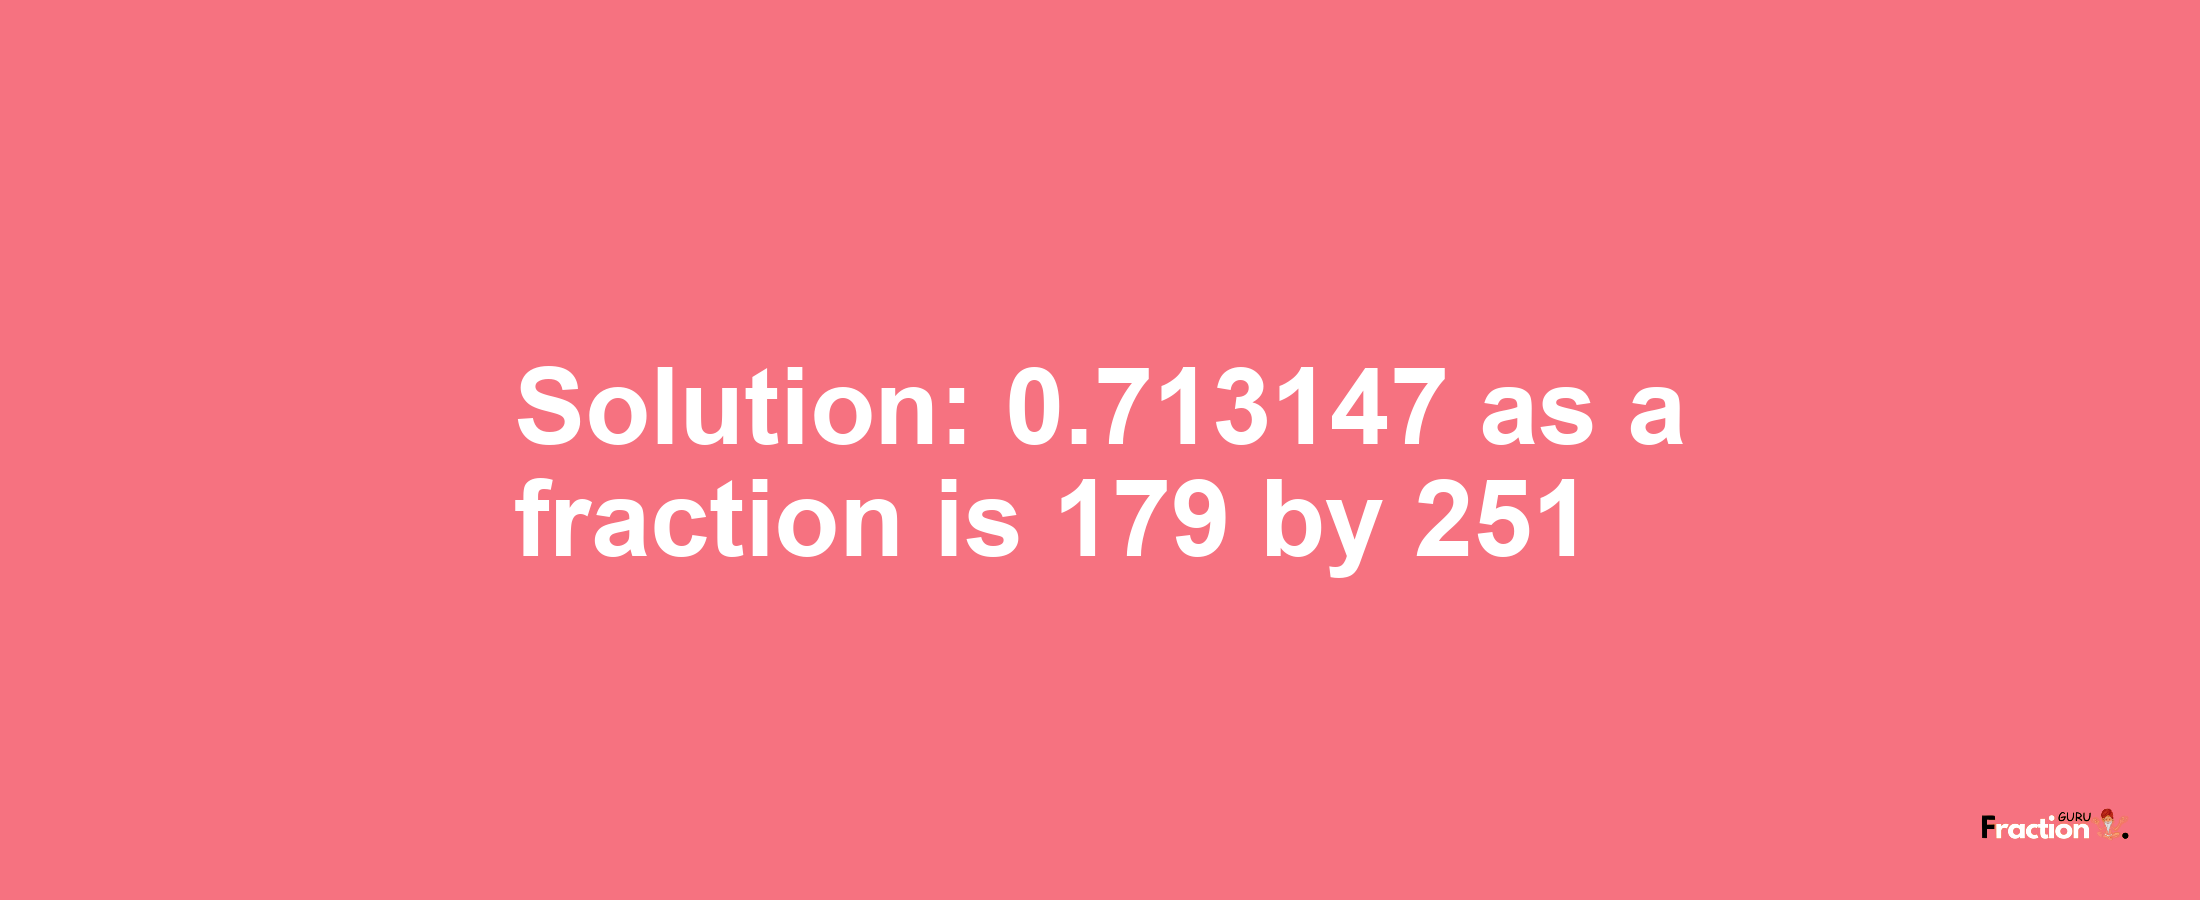 Solution:0.713147 as a fraction is 179/251